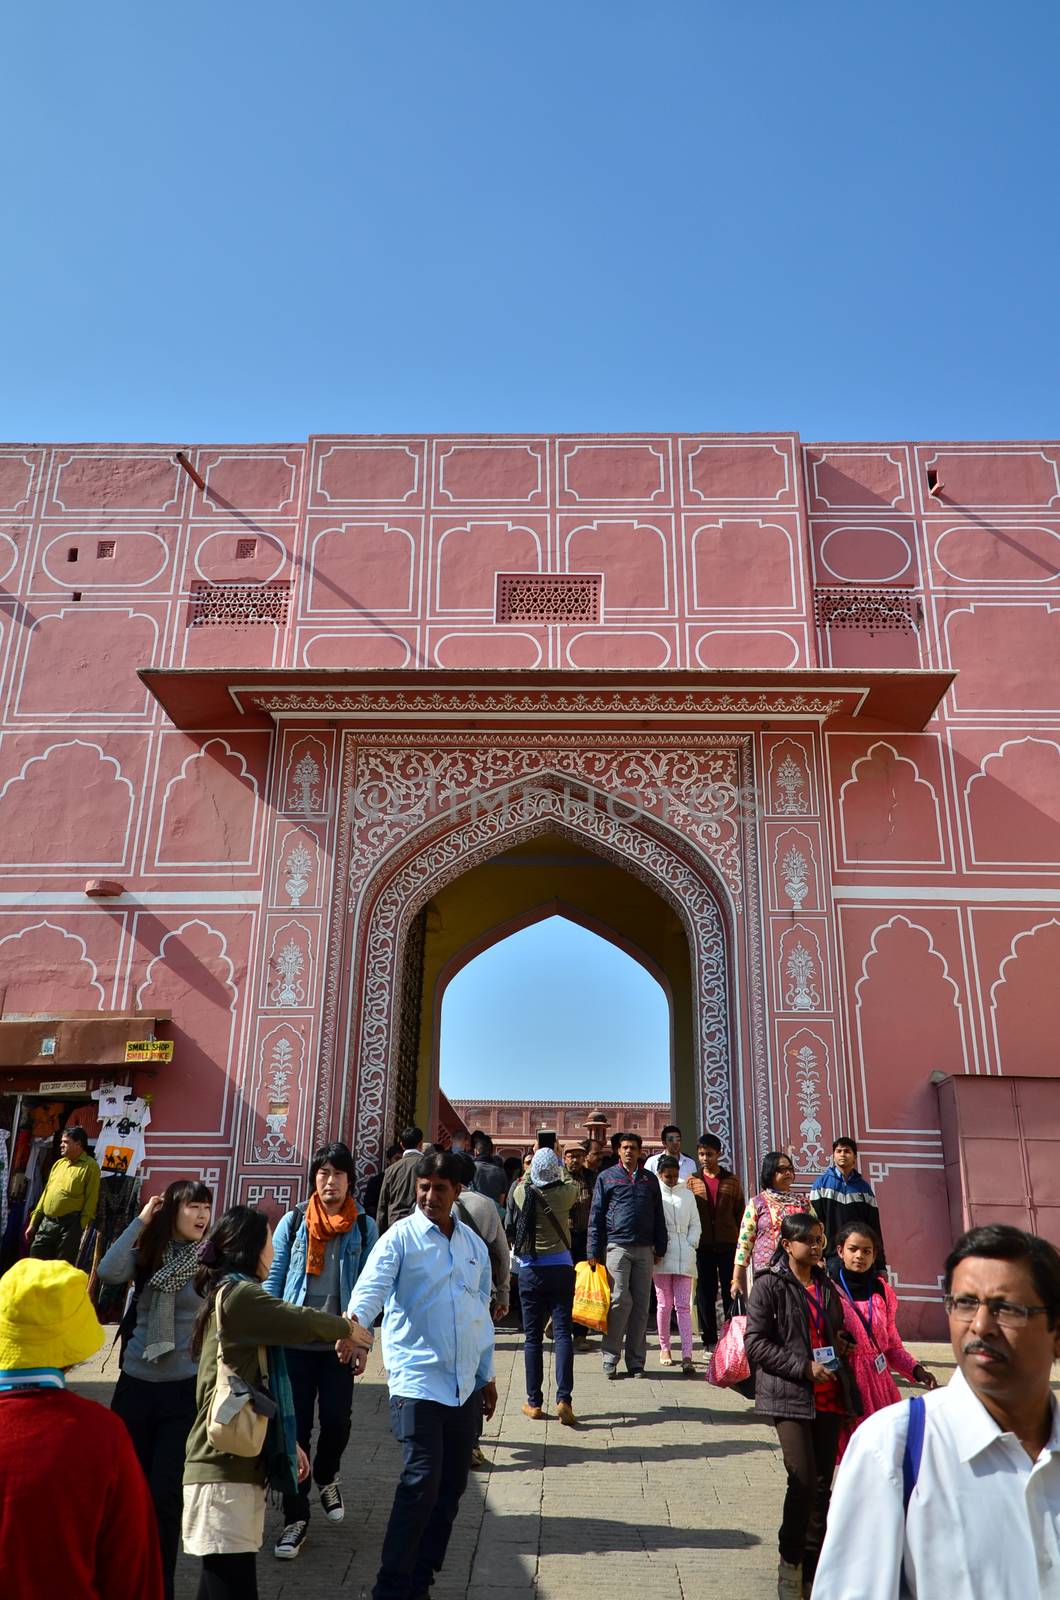 Jaipur, India - December 29, 2014: People visit The City Palace complex in Jaipur by siraanamwong